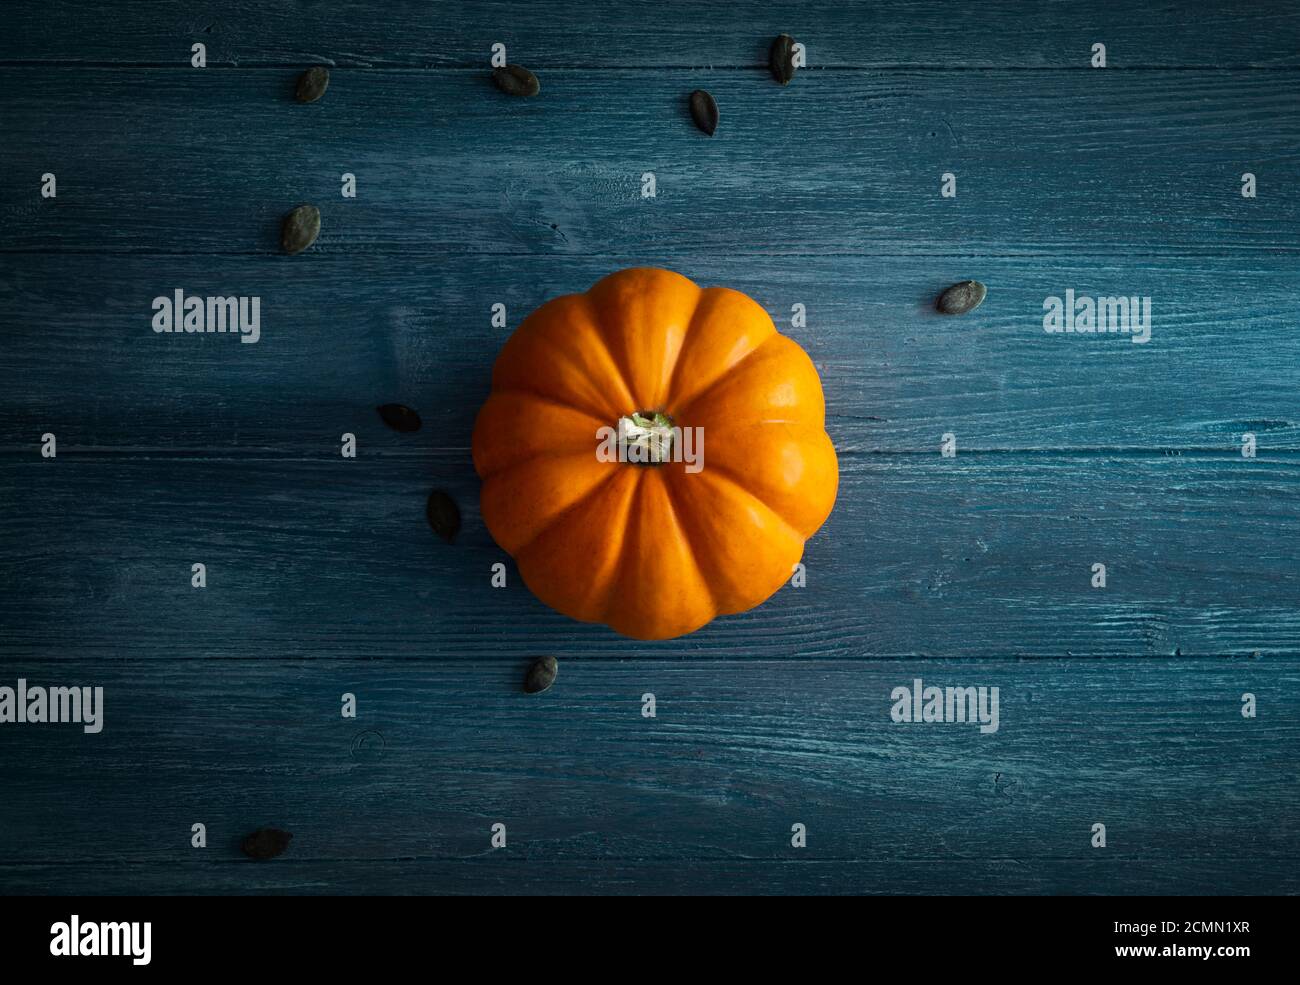 Orange pumpkin on blue wooden background top view, ideal for backgrounds, layouts and Template Stock Photo